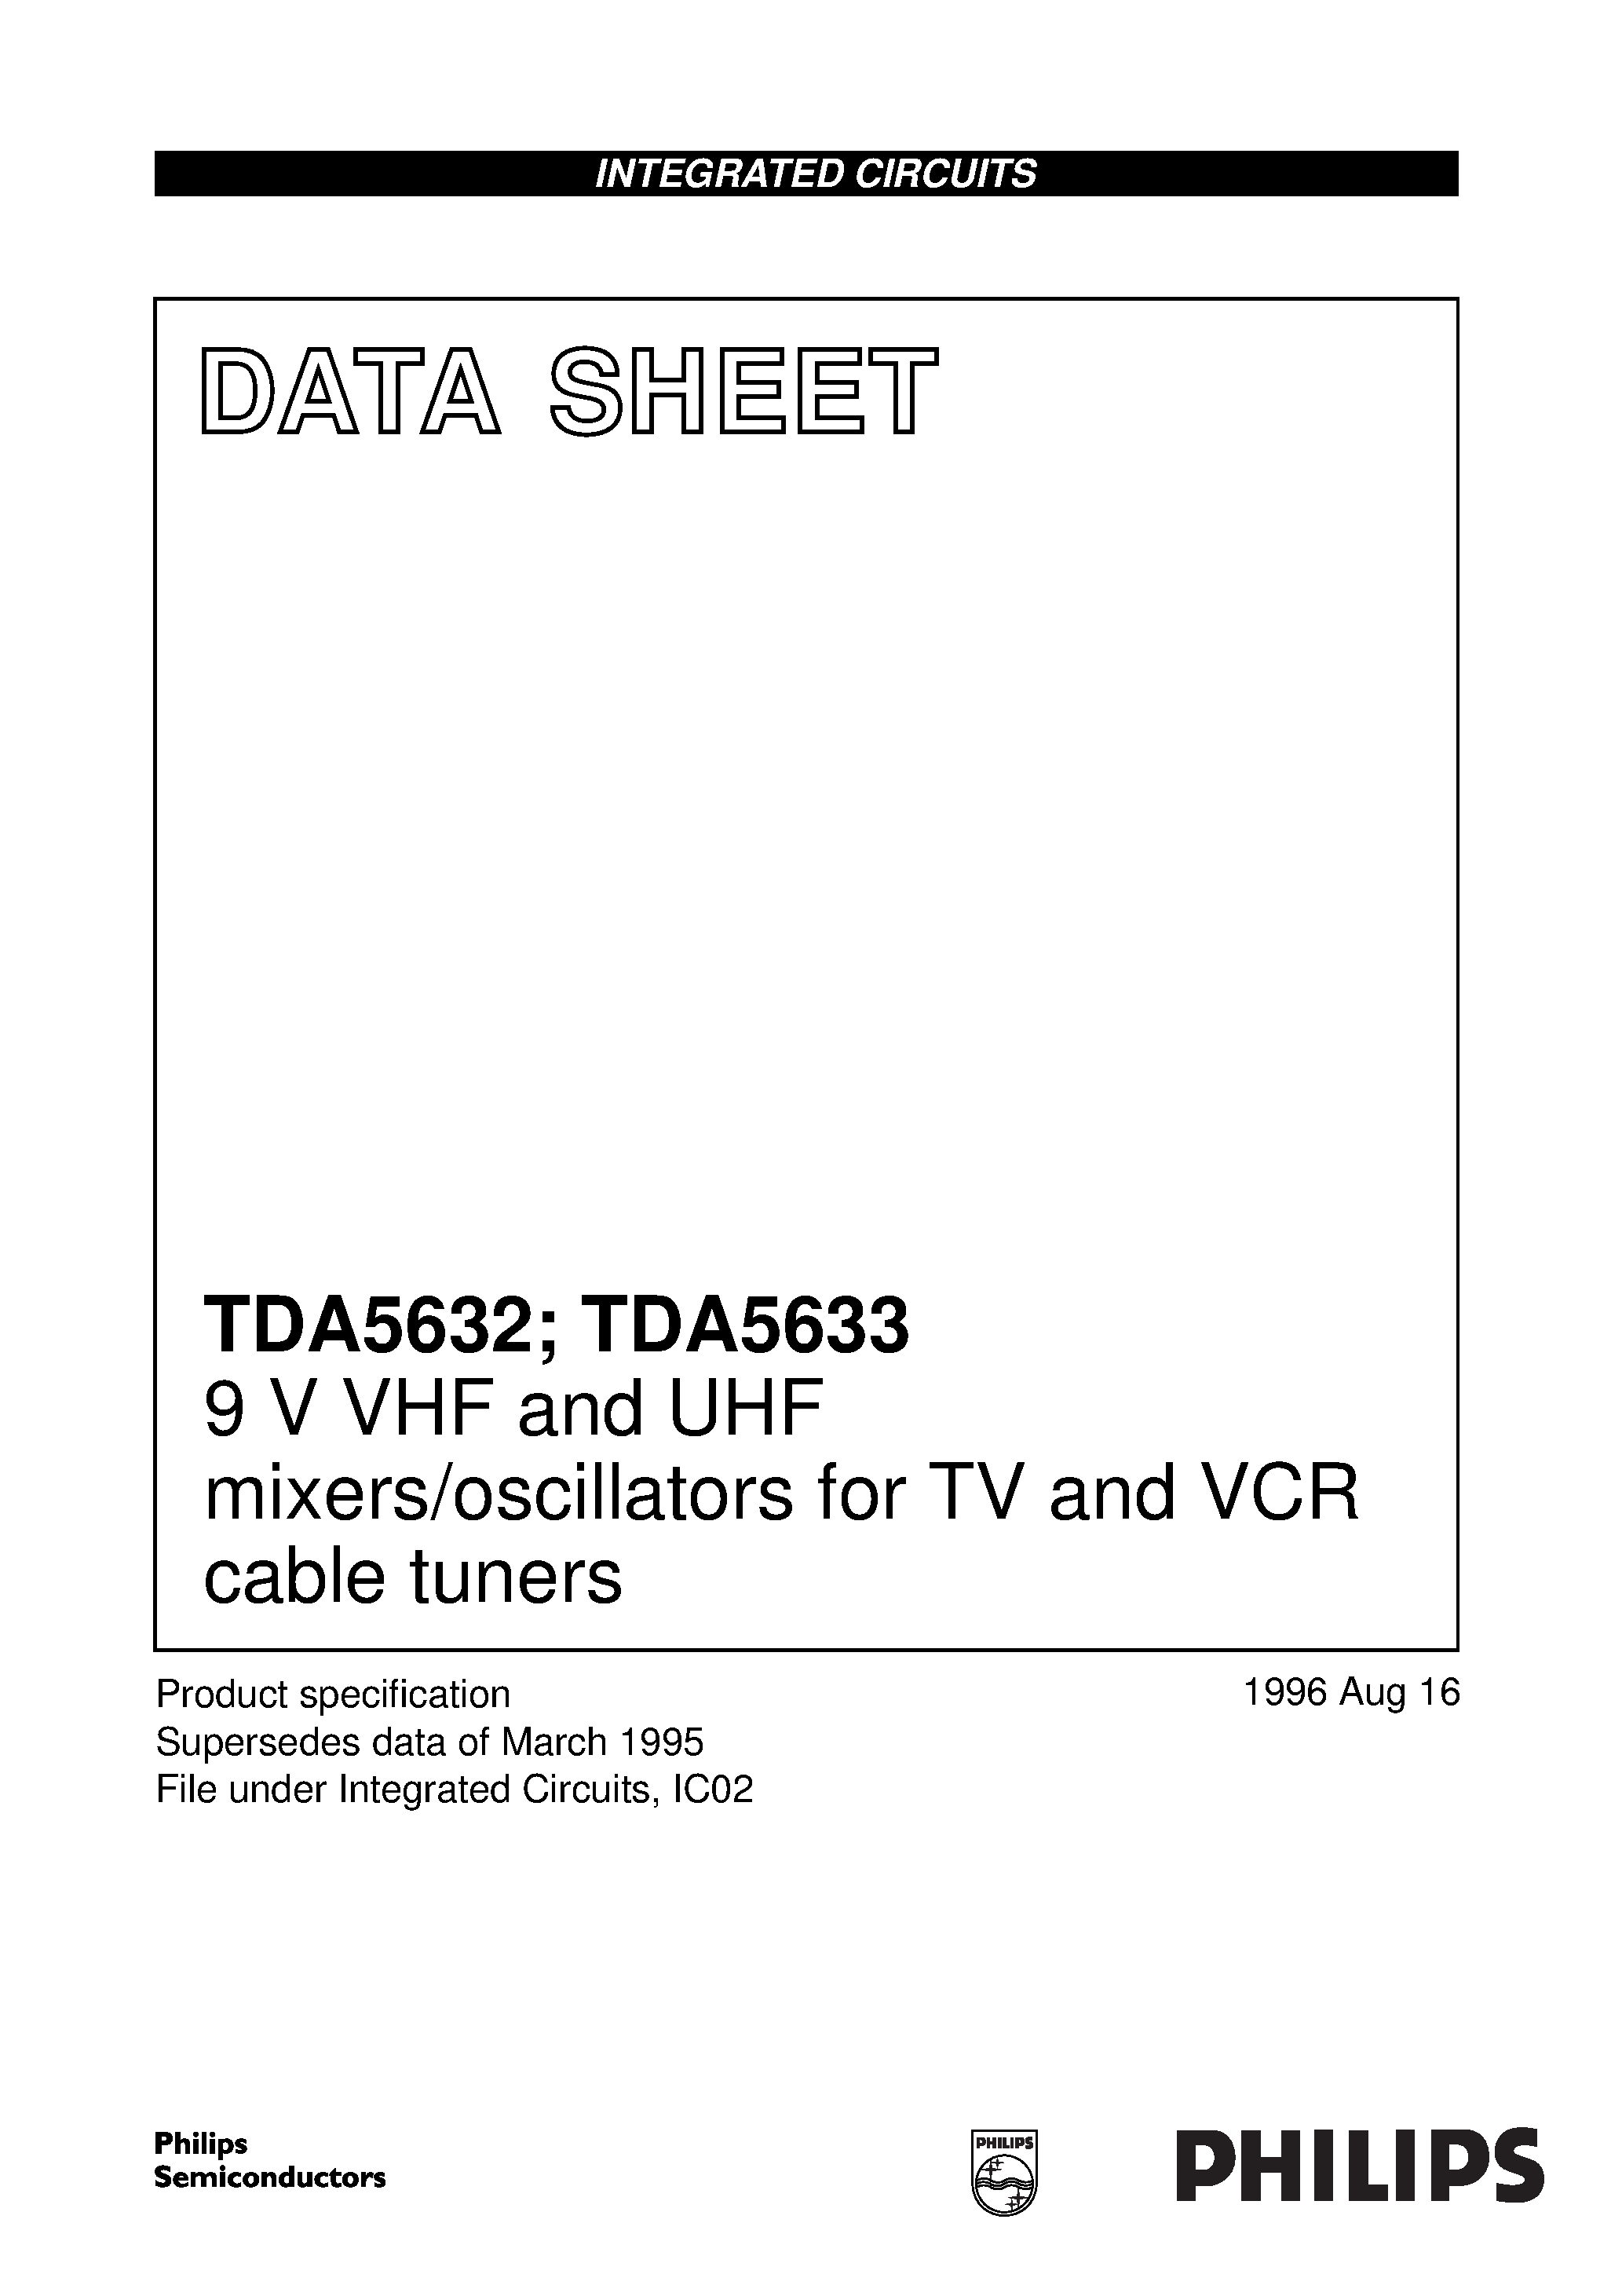 Даташит TDA5633T - 9 V VHF and UHF mixers/oscillators for TV and VCR cable tuners страница 1